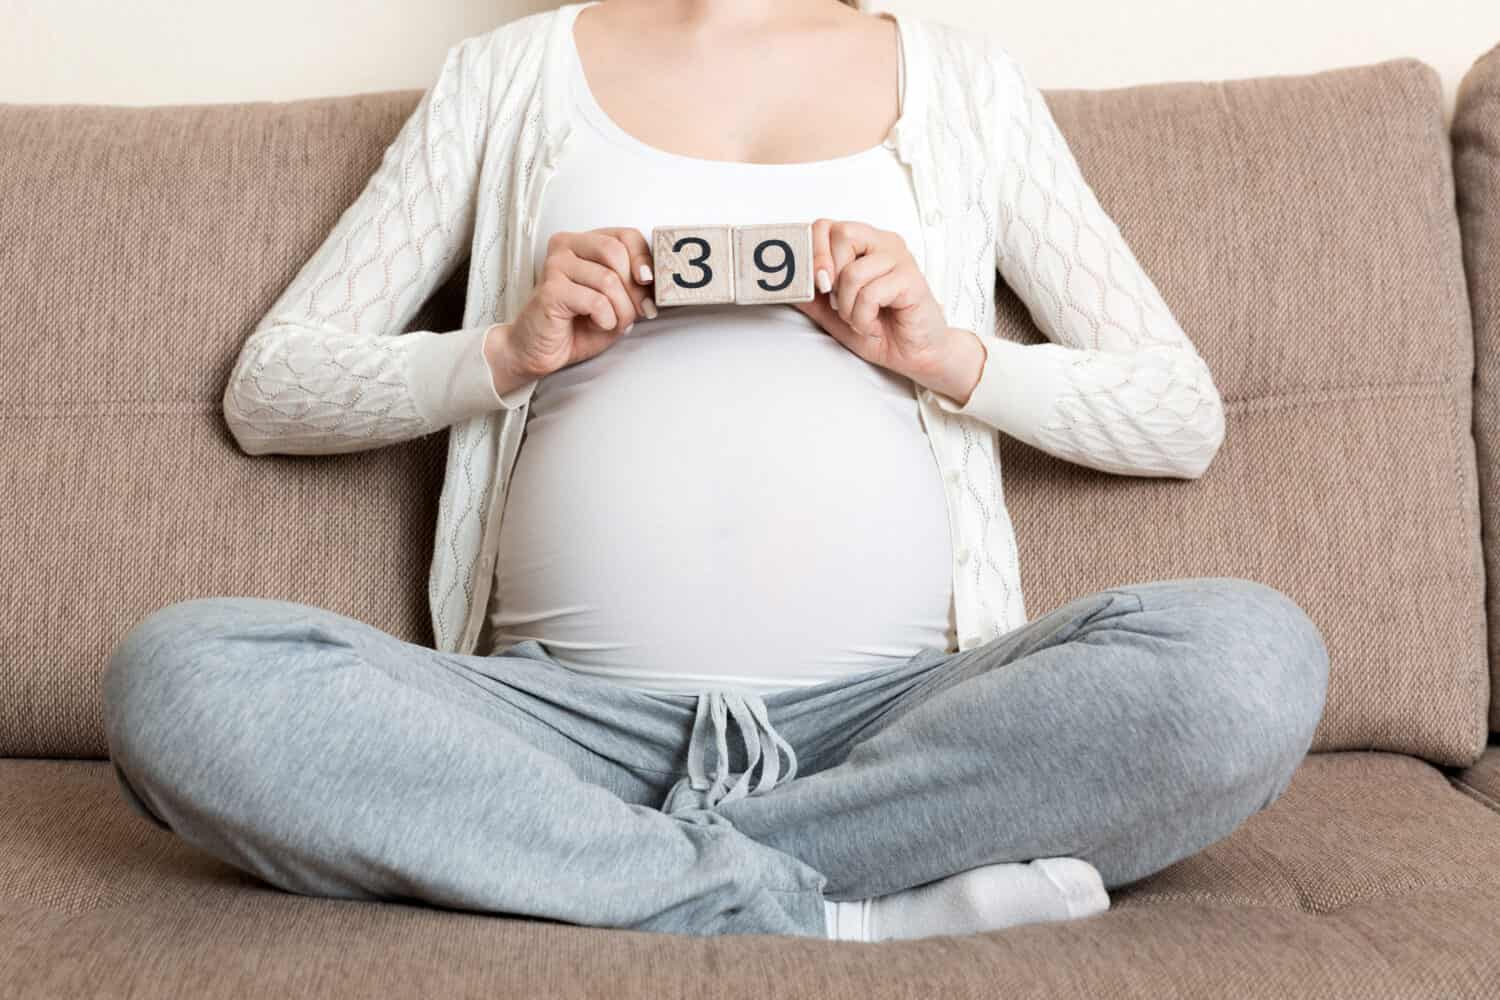 Pregnant woman in white underwear on bed in home holding calendar with weeks 39 of pregnant. Maternity concept. Expecting an upcoming baby.